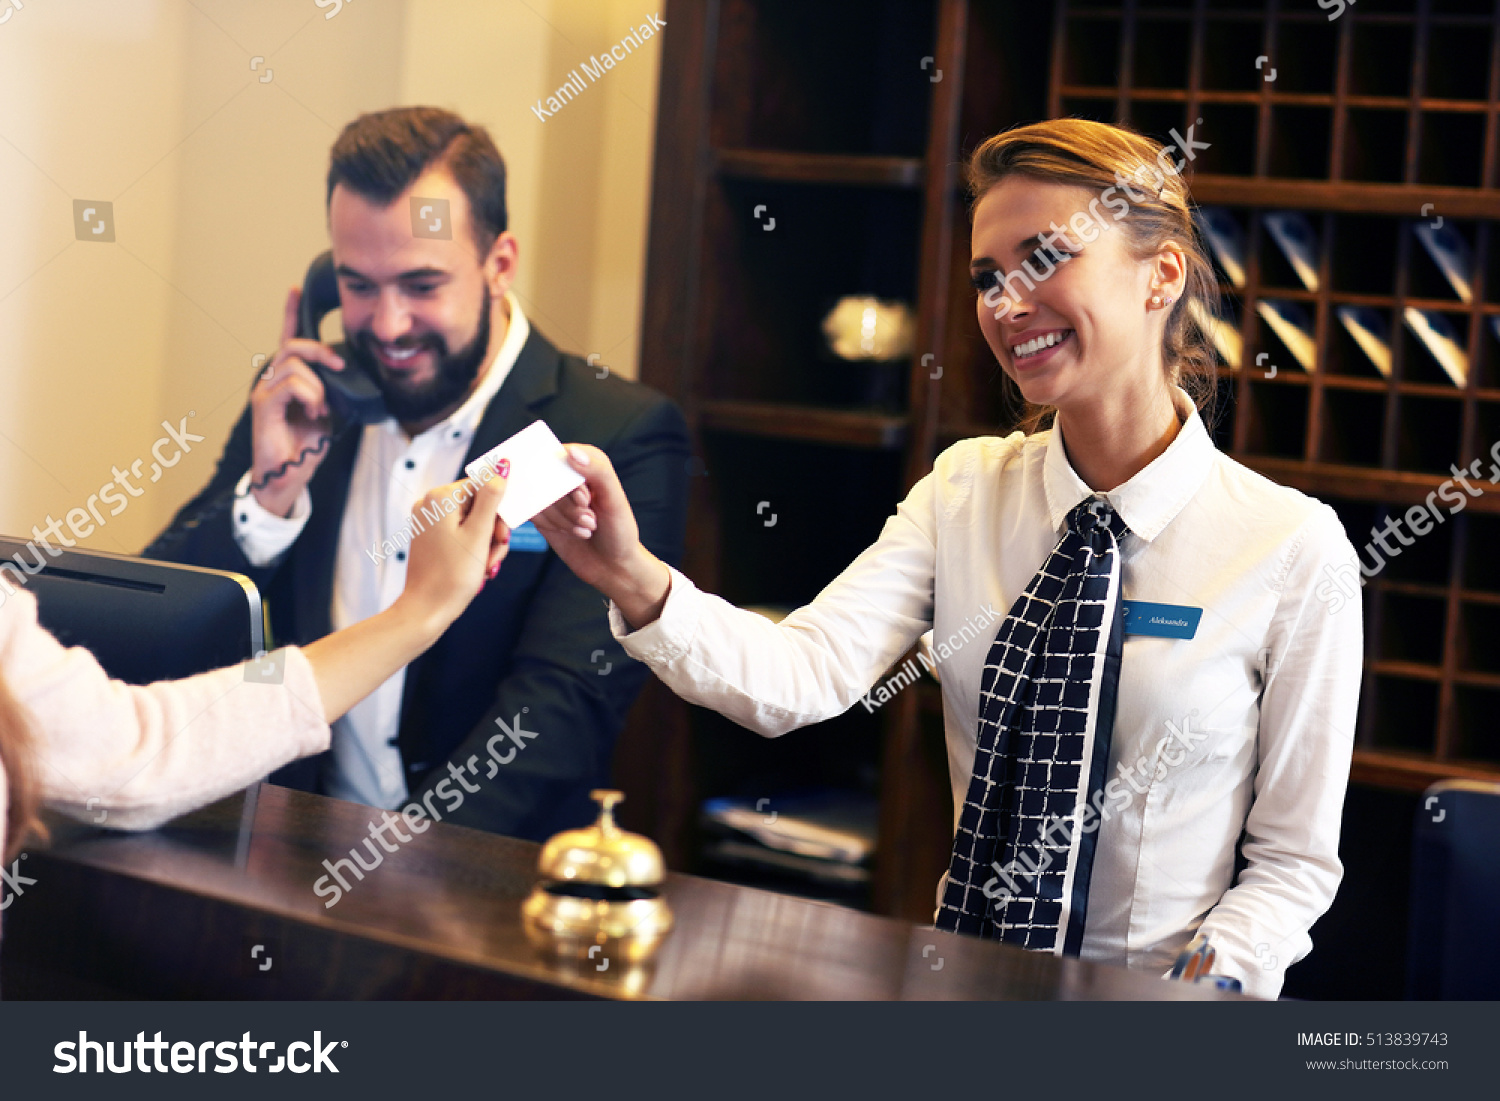 Picture of guests getting key card in hotel #513839743